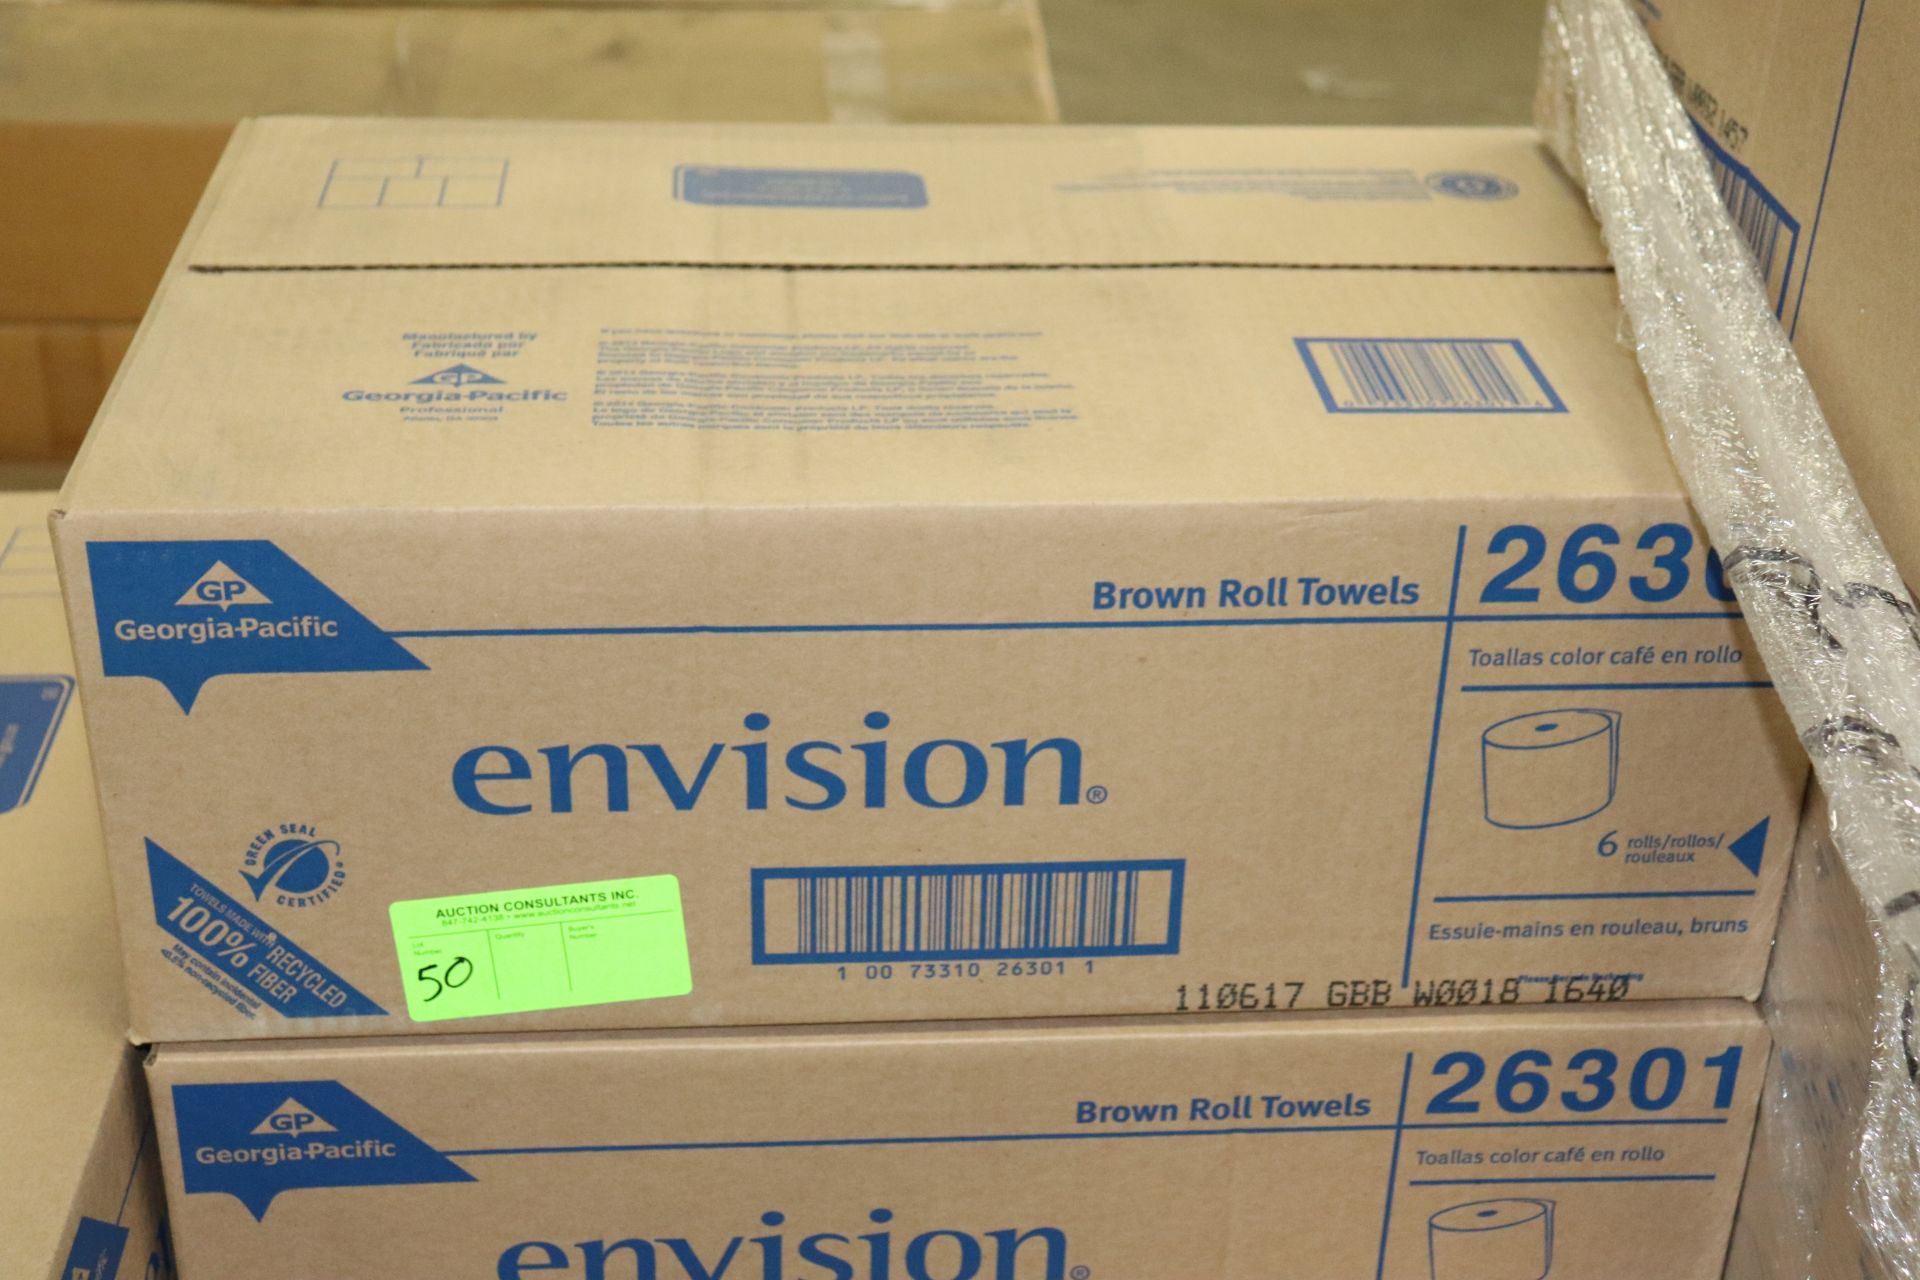 One case of Envision brown rolls towels